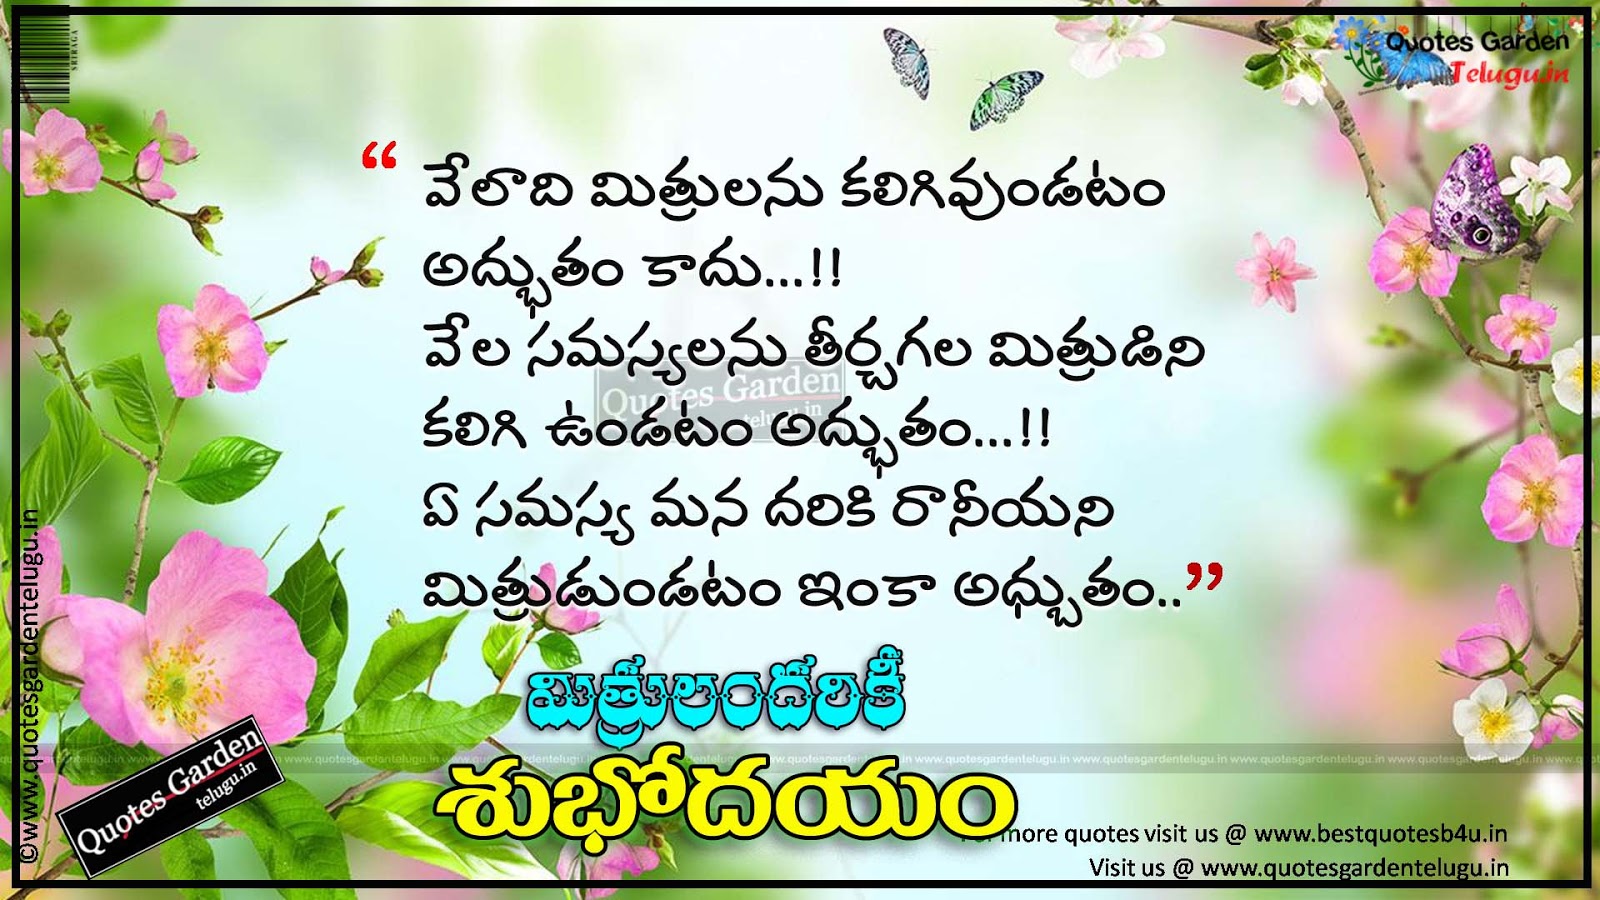 Best Telugu Friendship Quotes with good morning greetings | QUOTES ...